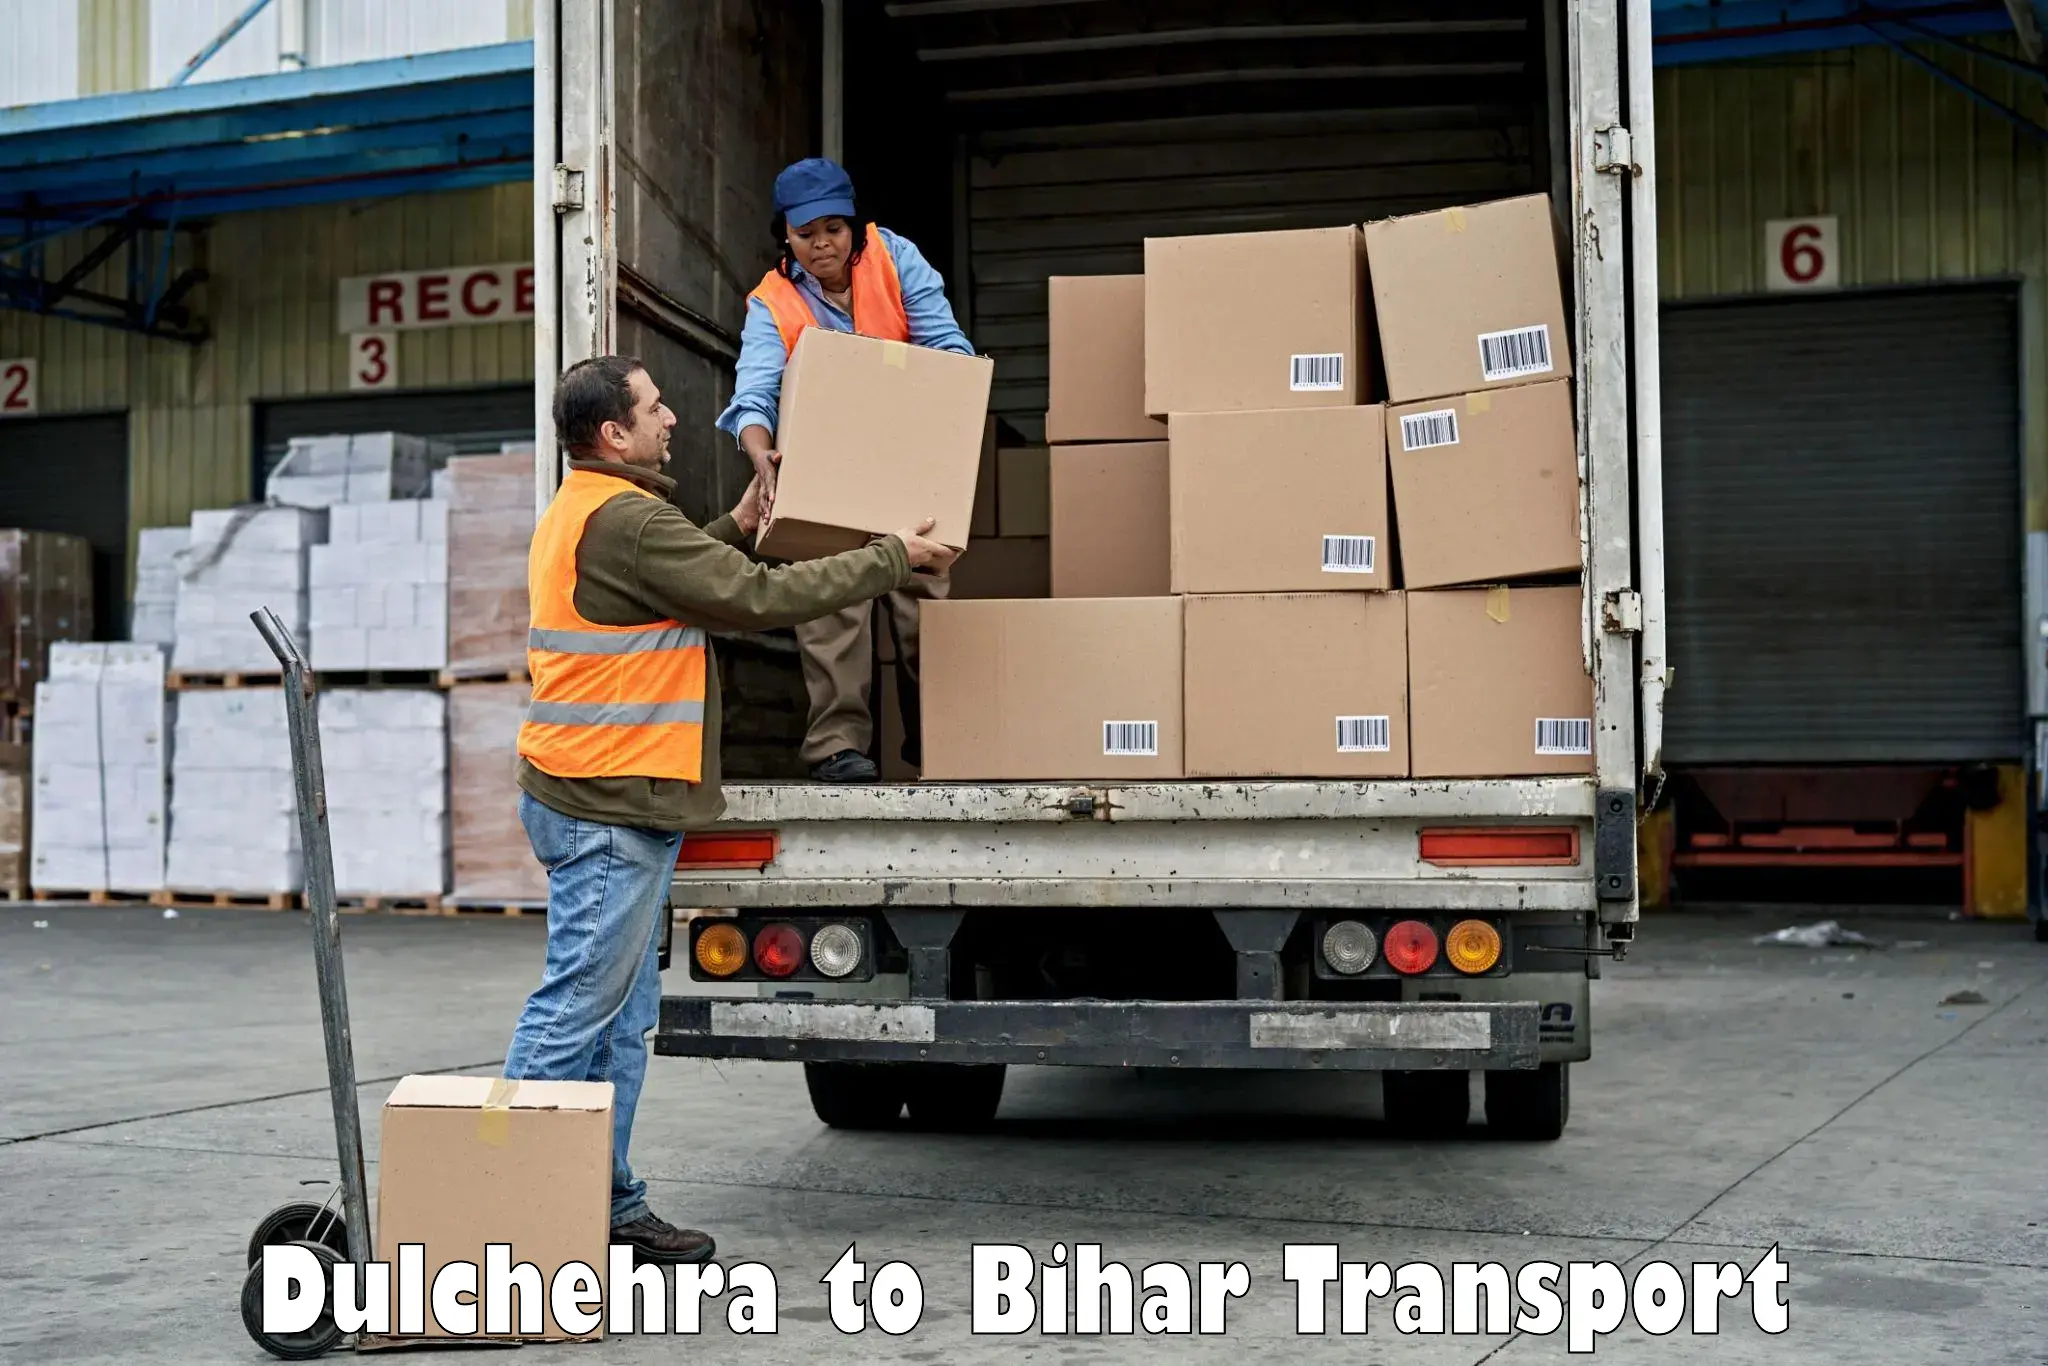 Container transport service Dulchehra to Nawada